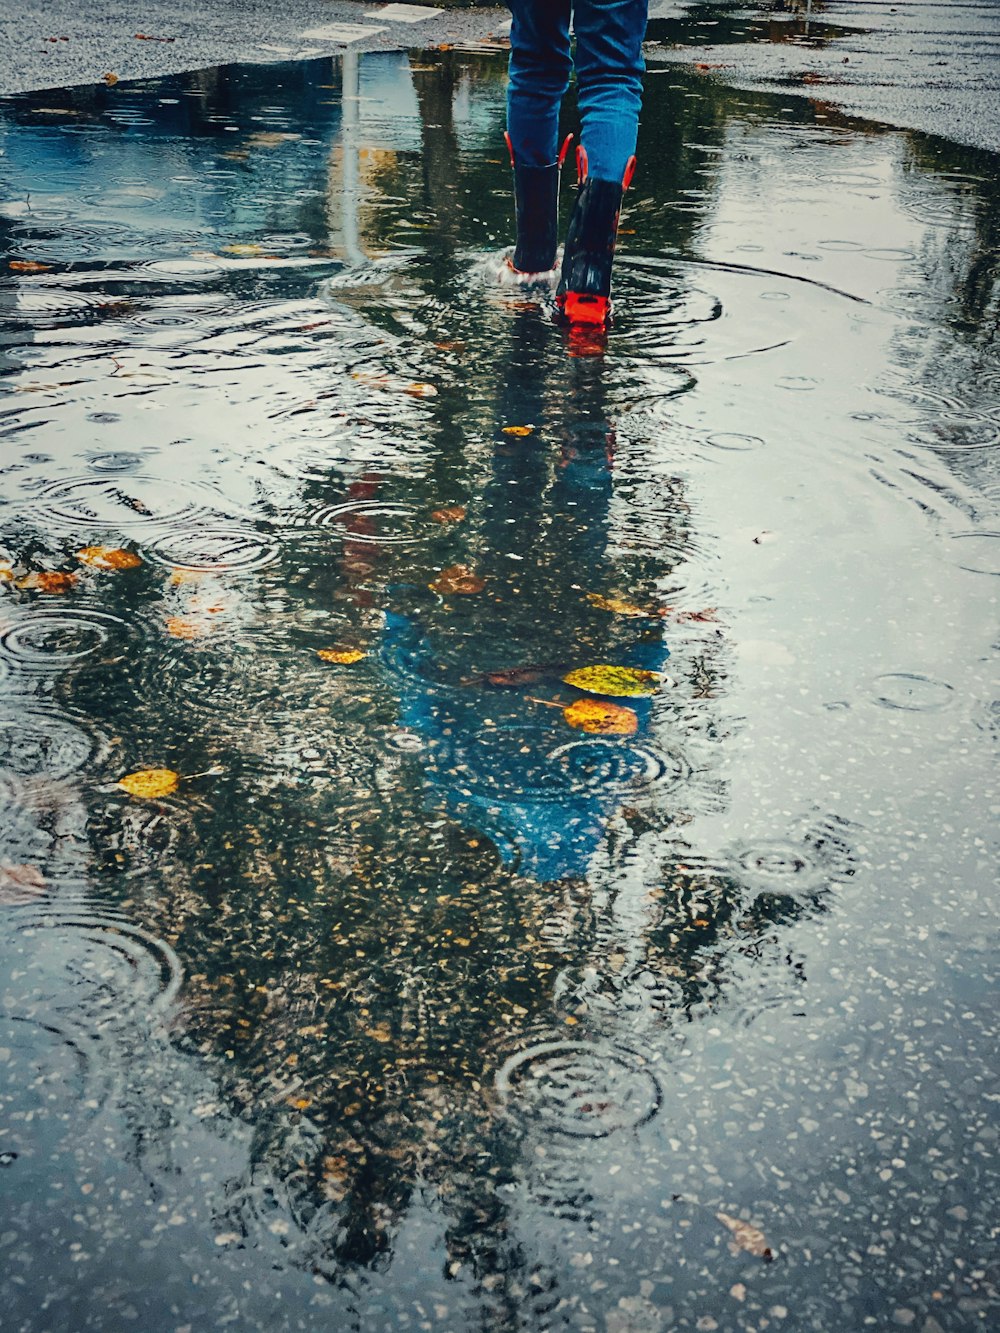 person wearing pair of red-and-black rain boots walking towards water puddle